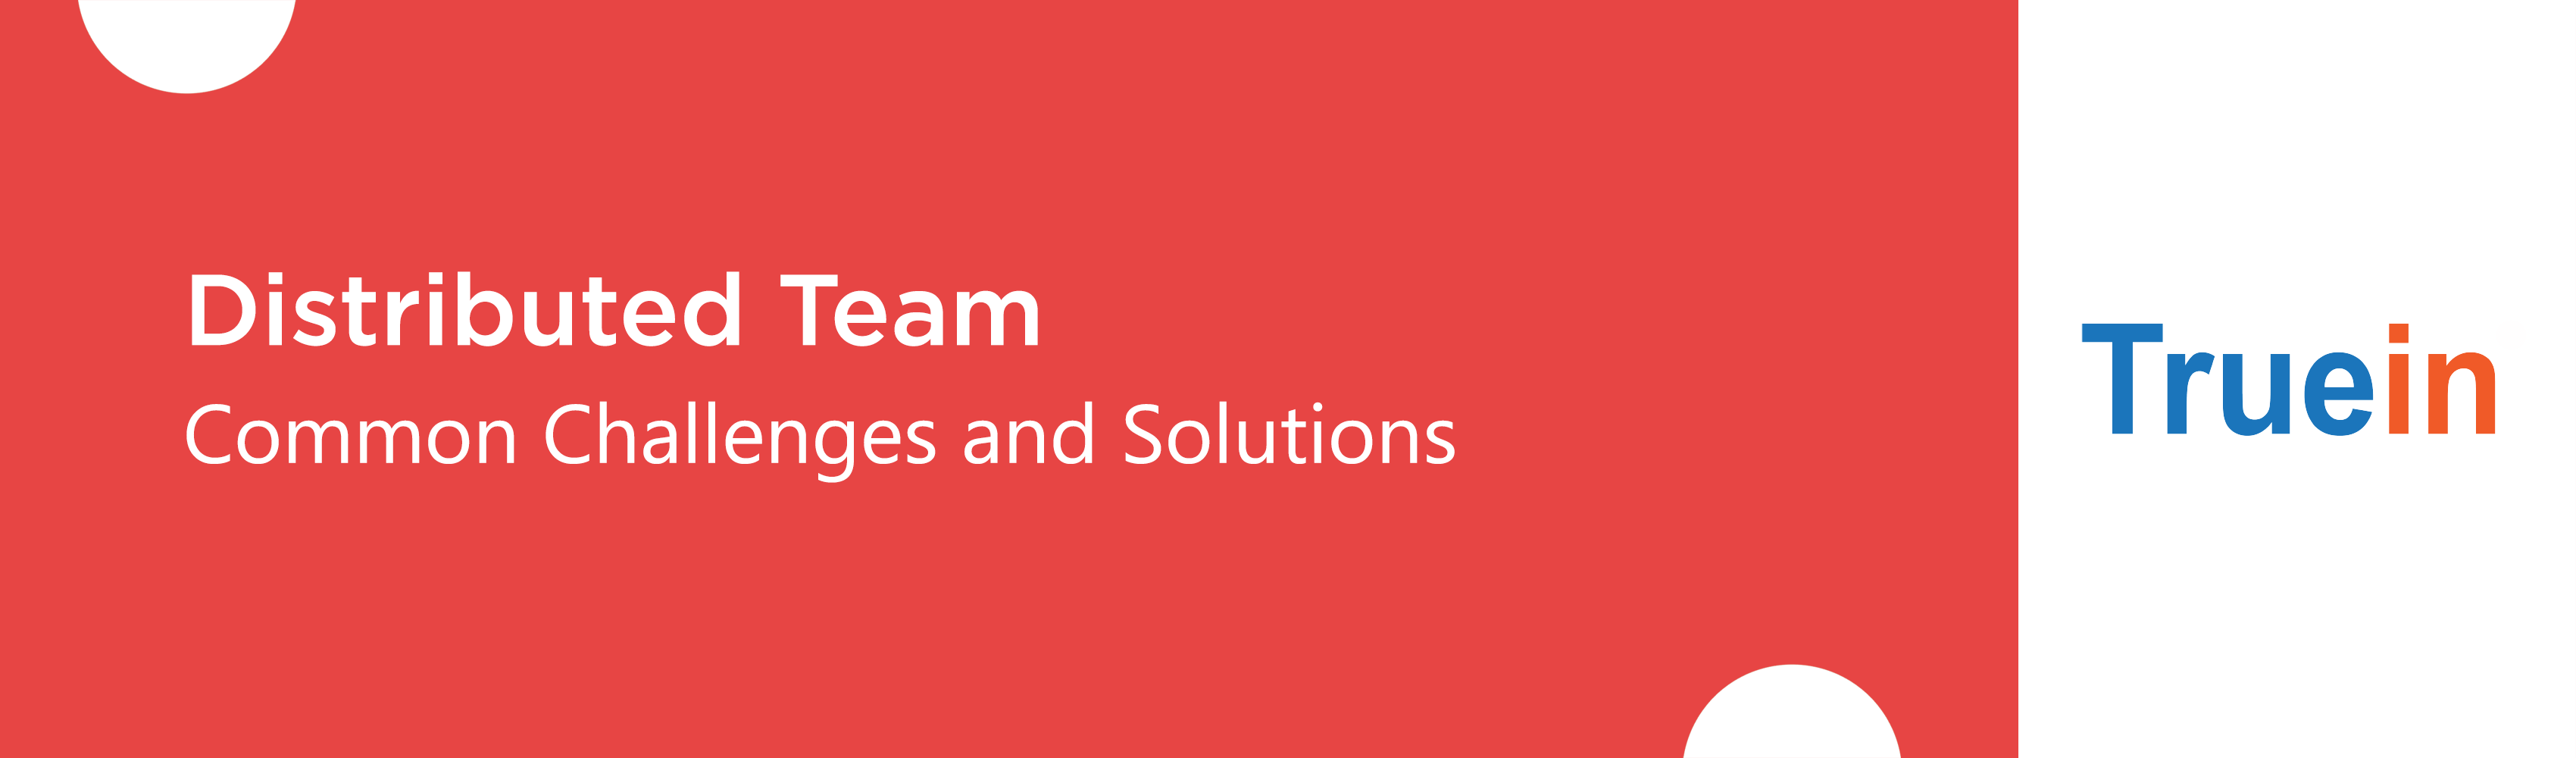 Distributed Team Common Challenges and Solutions